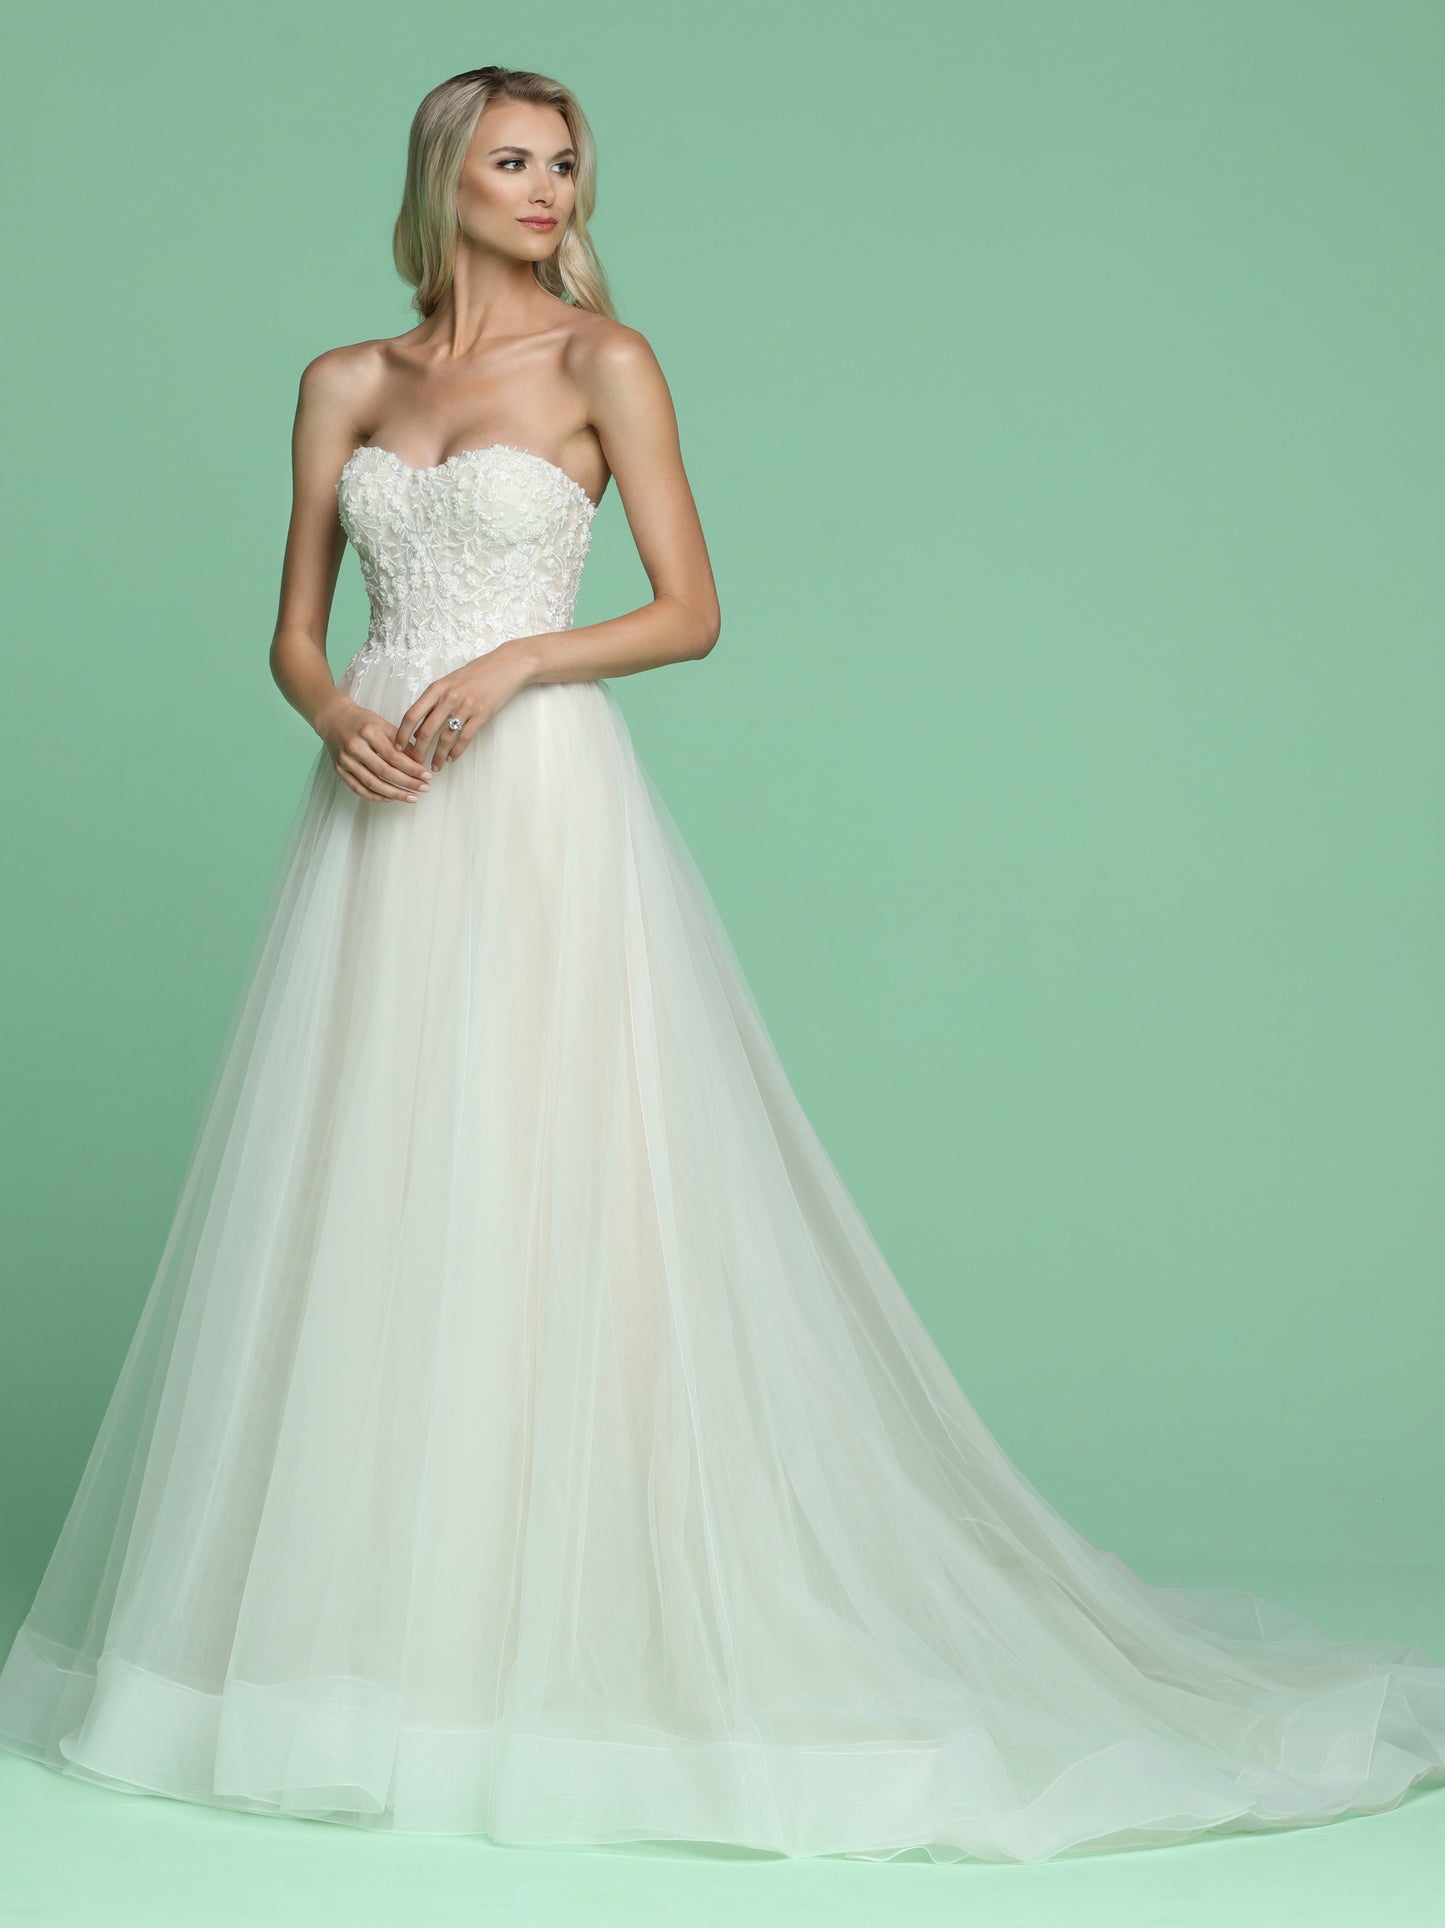 Davinci Bridal 50614 is a long Soft Tulle A Line ballgown with a strapless floral beaded applique bodice. Horse hair trim on the layers of lush tulle the skirt leading into a sweeping train.   Available for 1-2 Week Delivery!!!  Available Sizes: 2,4,6,8,10,12,14,16,18,20  Available Colors: Ivory/Ivory, Ivory/Nude